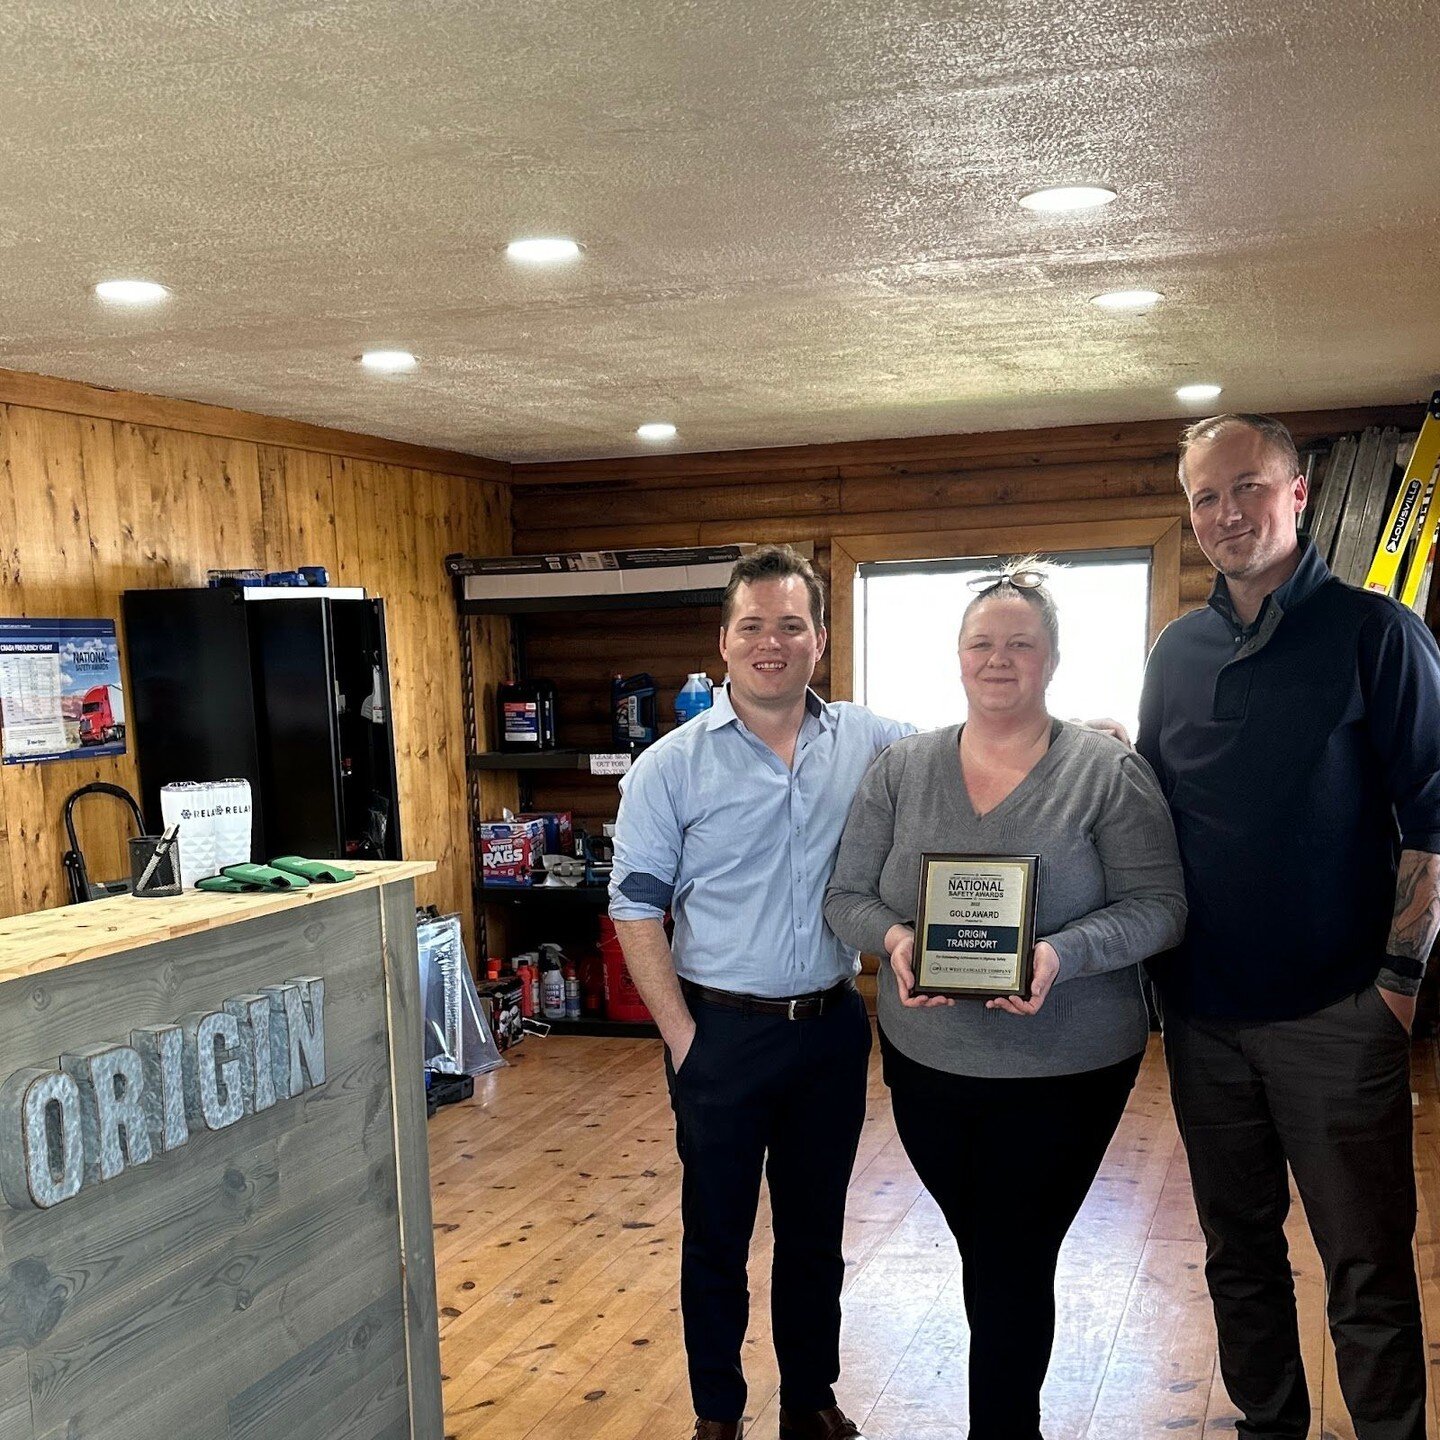 We are proud to announce that Origin Transport was the recipient of the 2022 Gold Safety Award from Great West Insurance. Our entire team at Origin Transport deserves recognition and celebration for this accomplishment, especially our incredible team